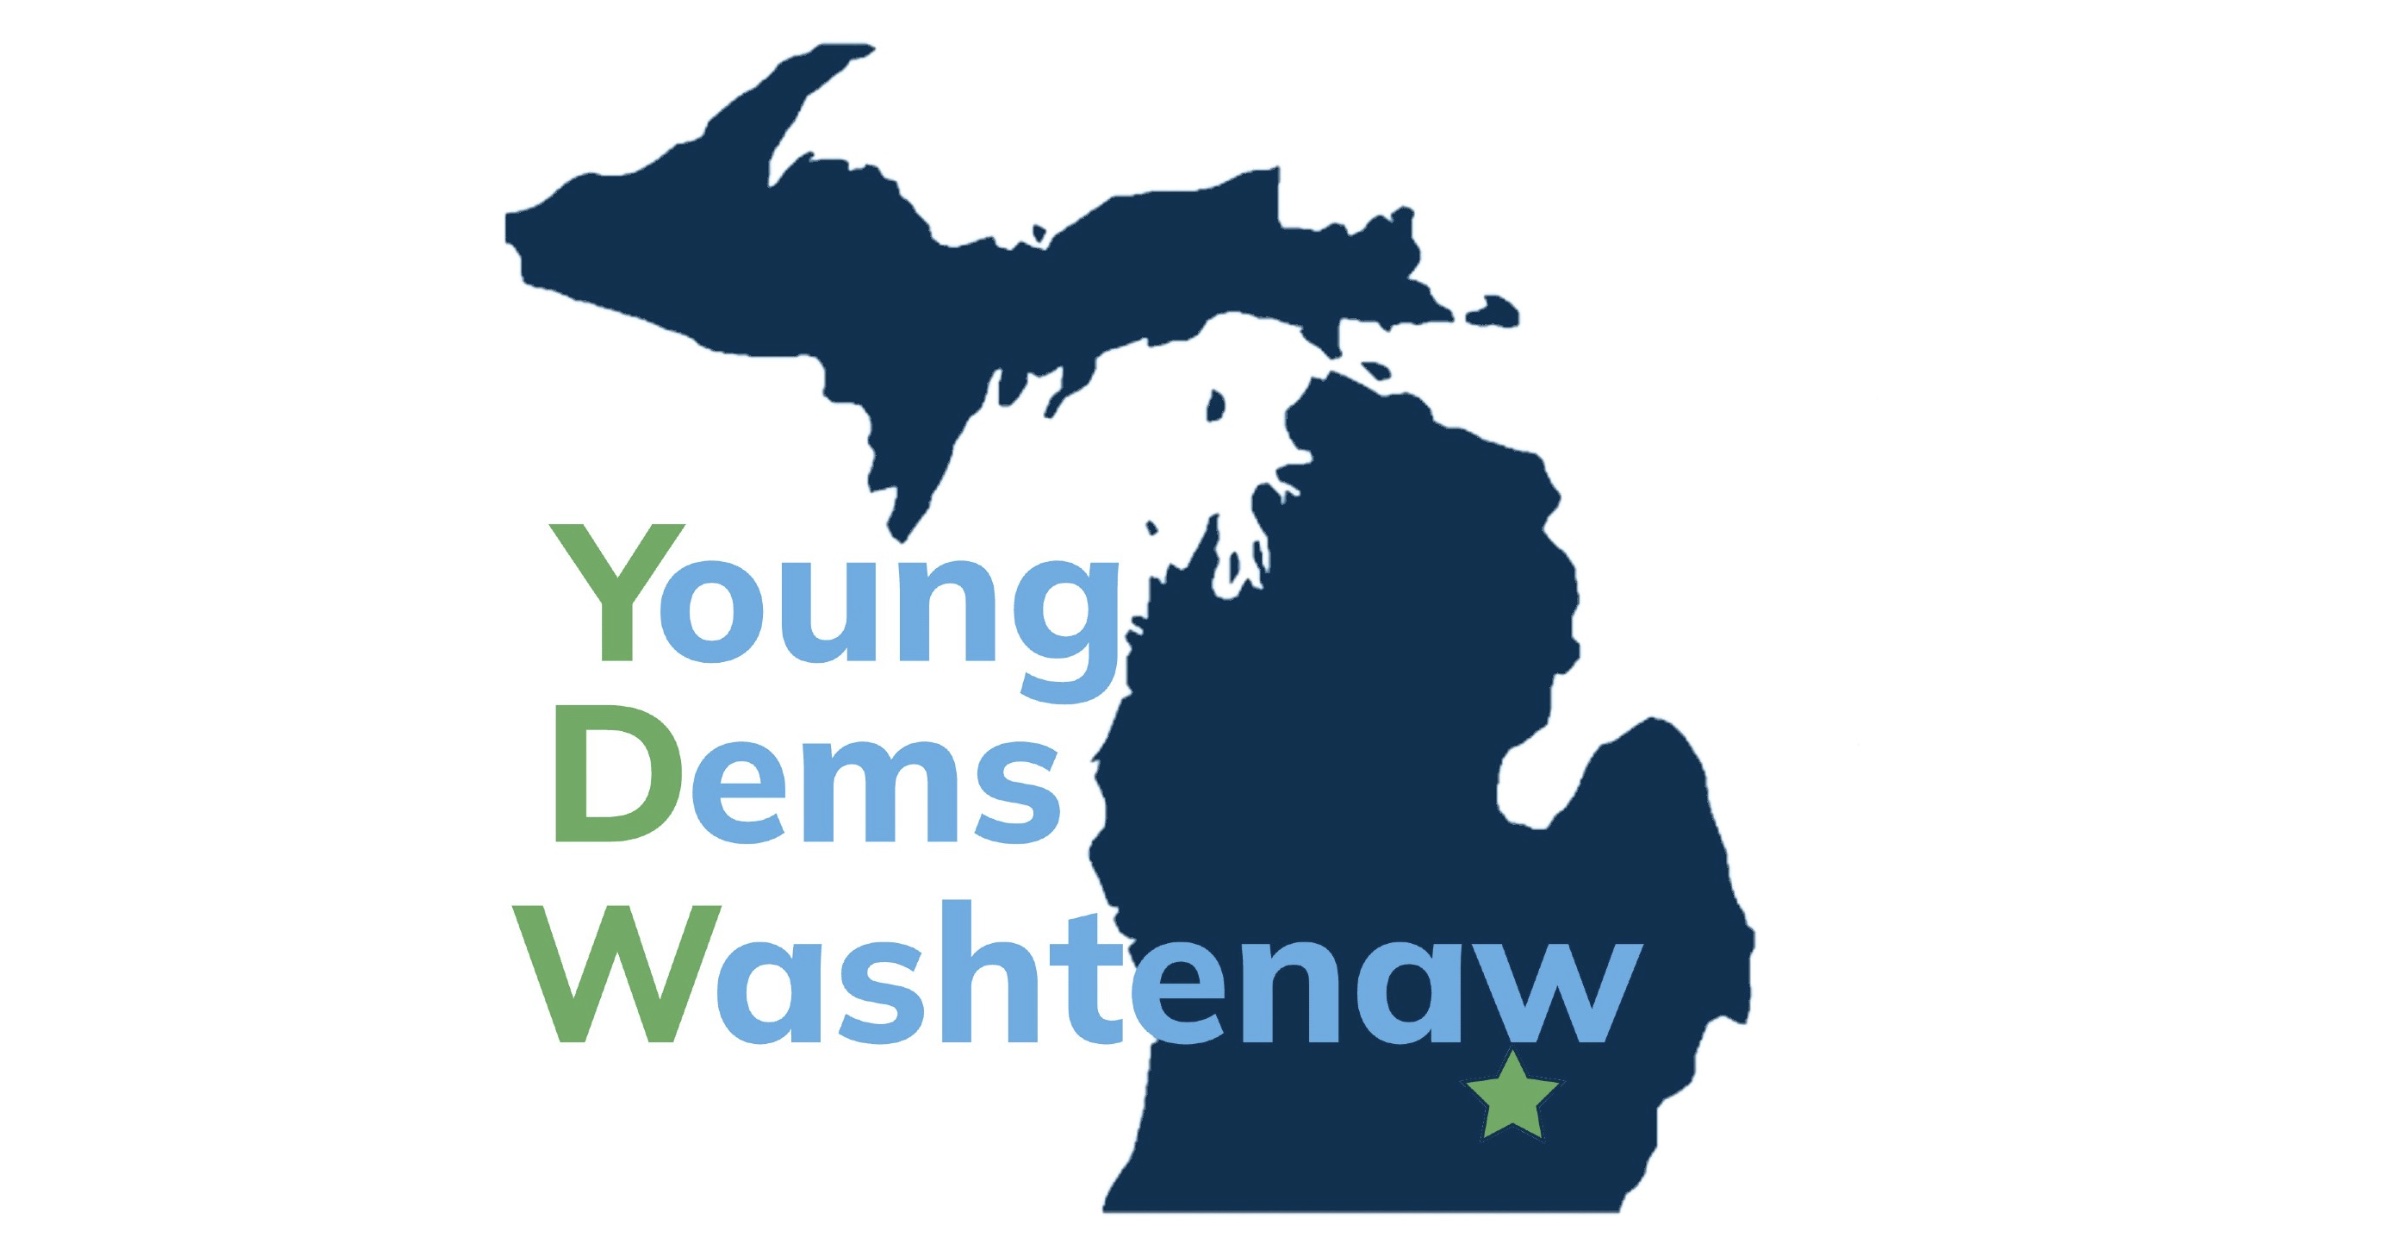 et details and sign up for "YDW May Meeting" hosted by Washtenaw County Democratic Party